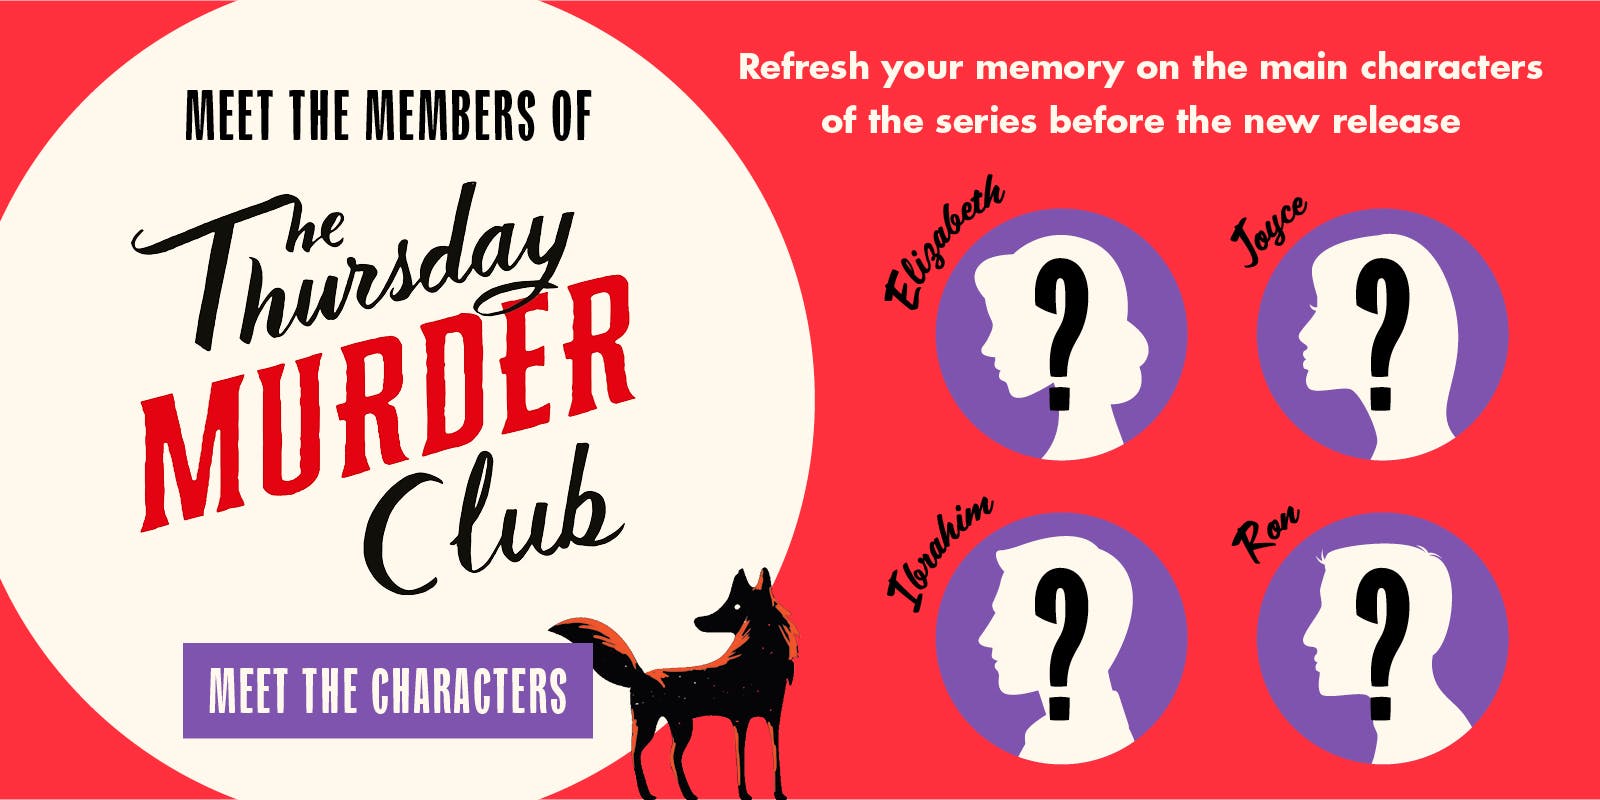 Meet the characters from The Thursday Murder Club